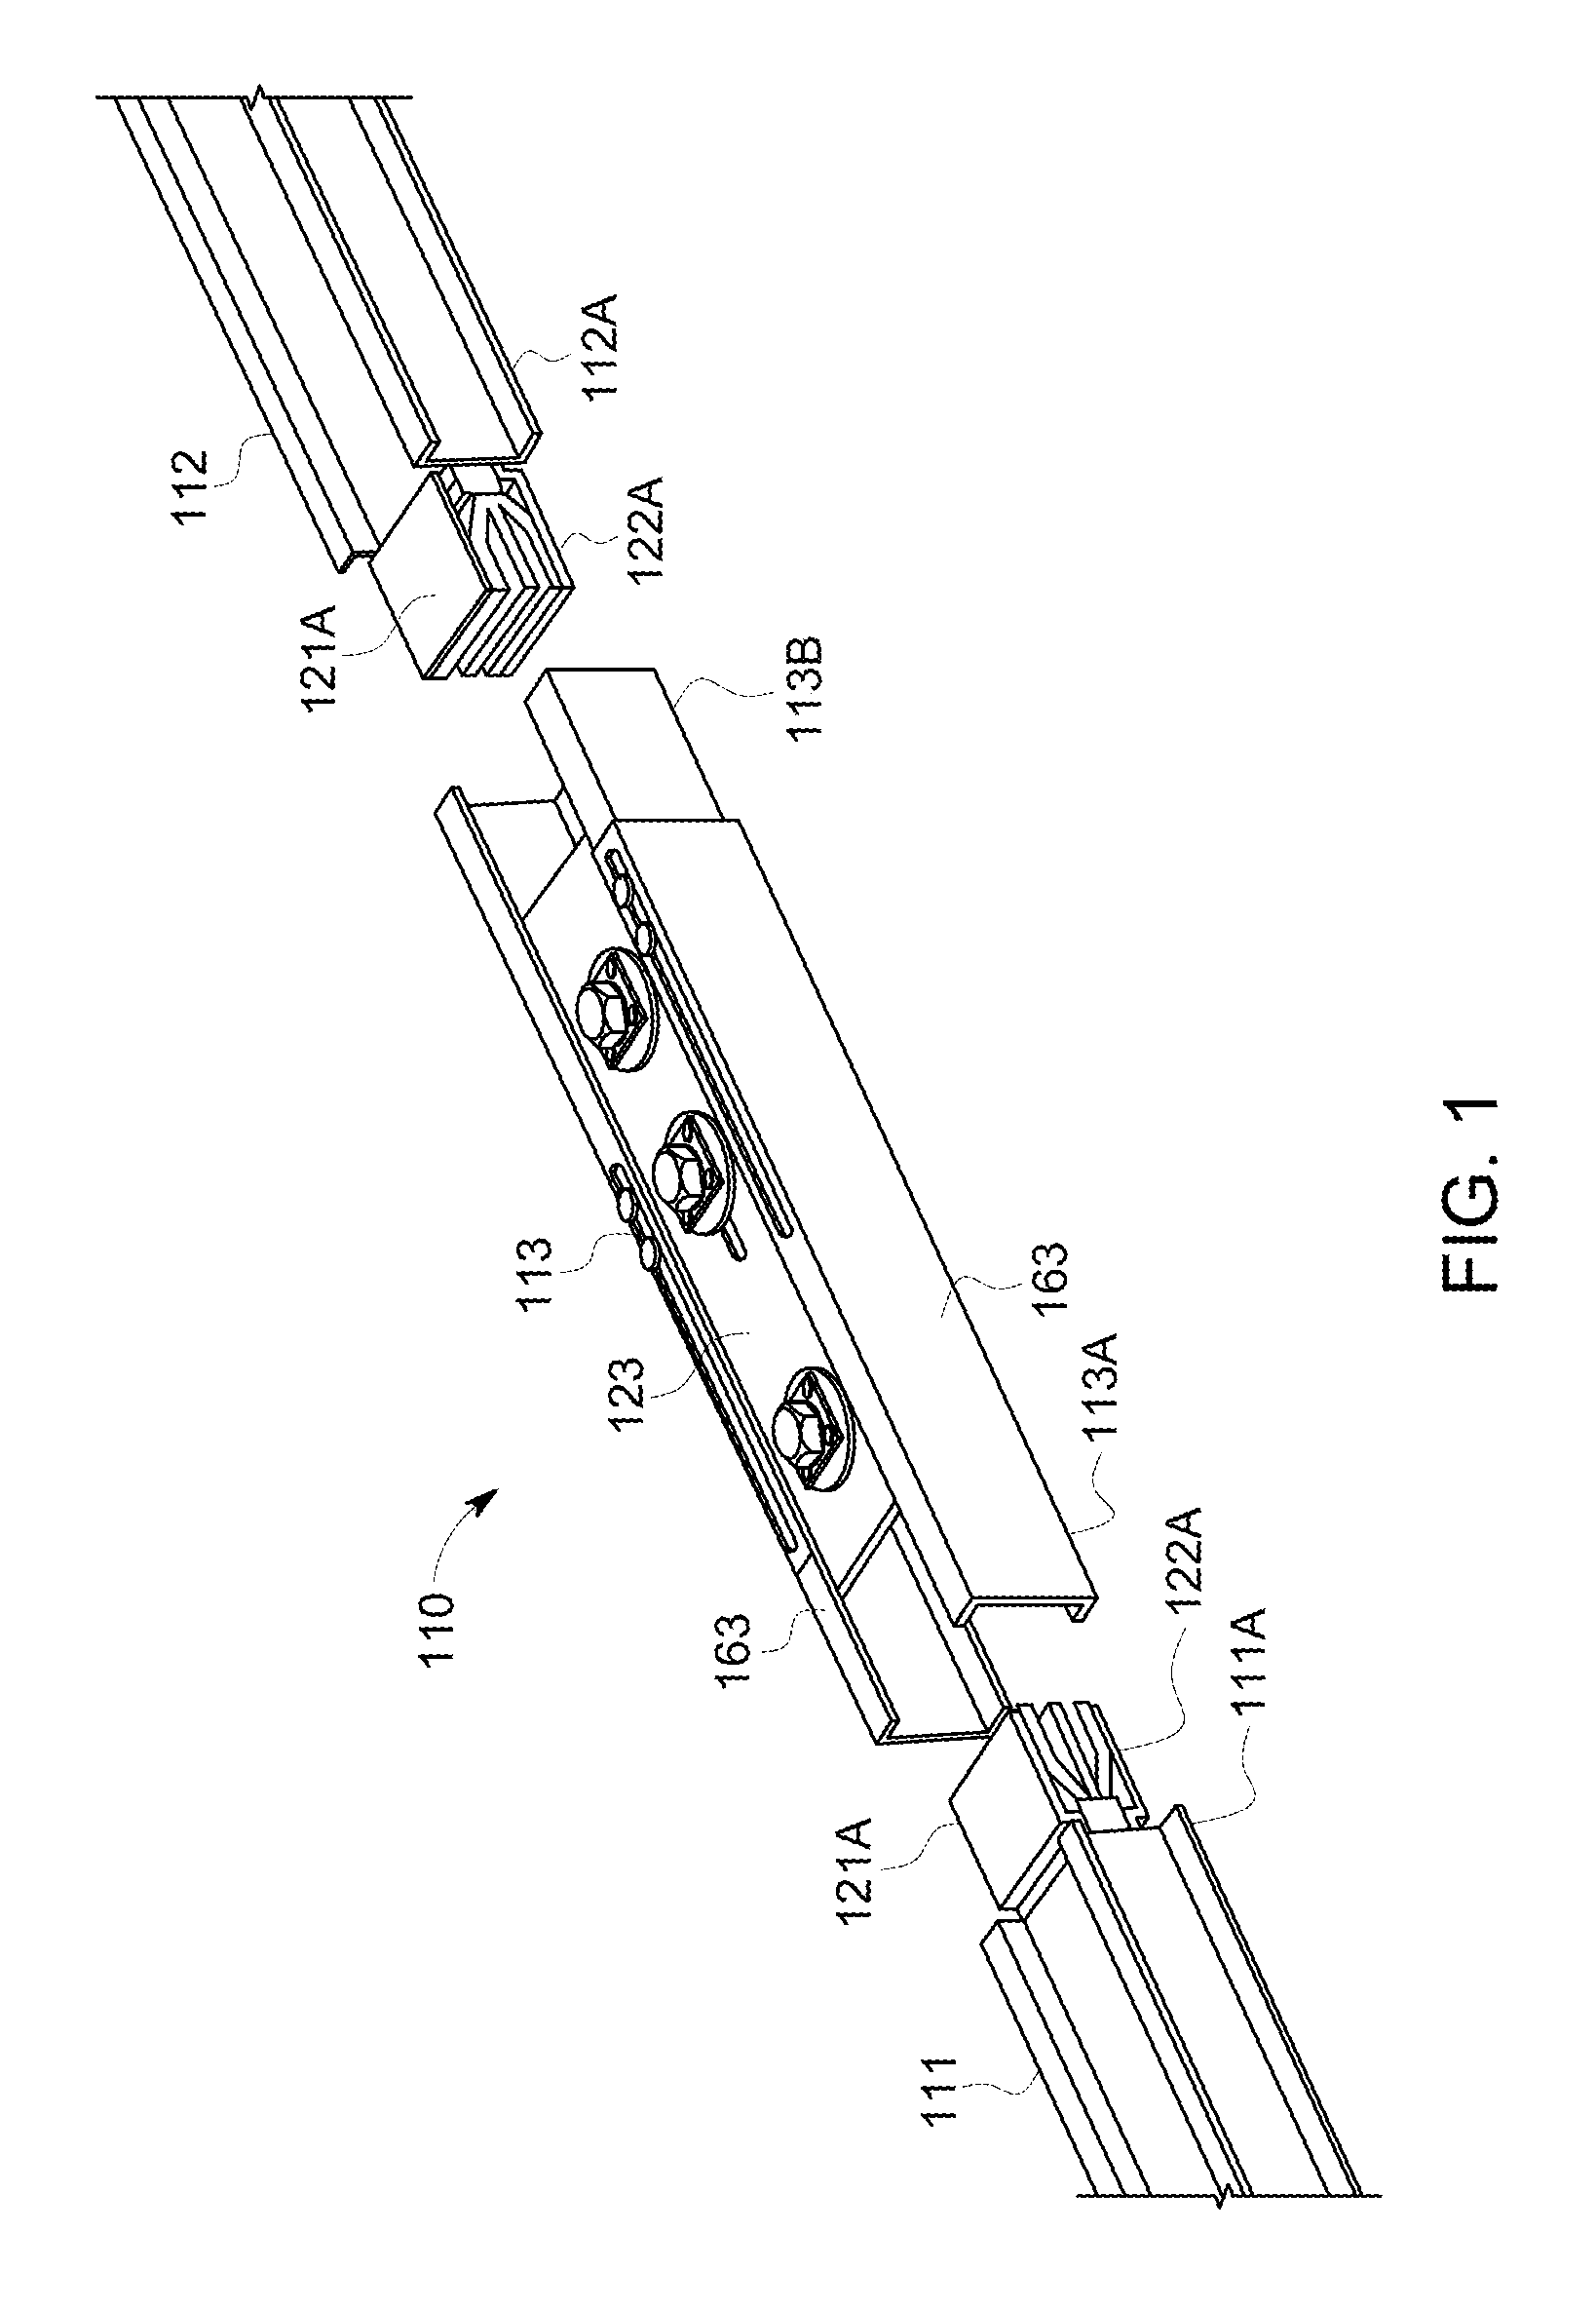 Busway joint coupling having an adjustable assembly for joining two busway sections